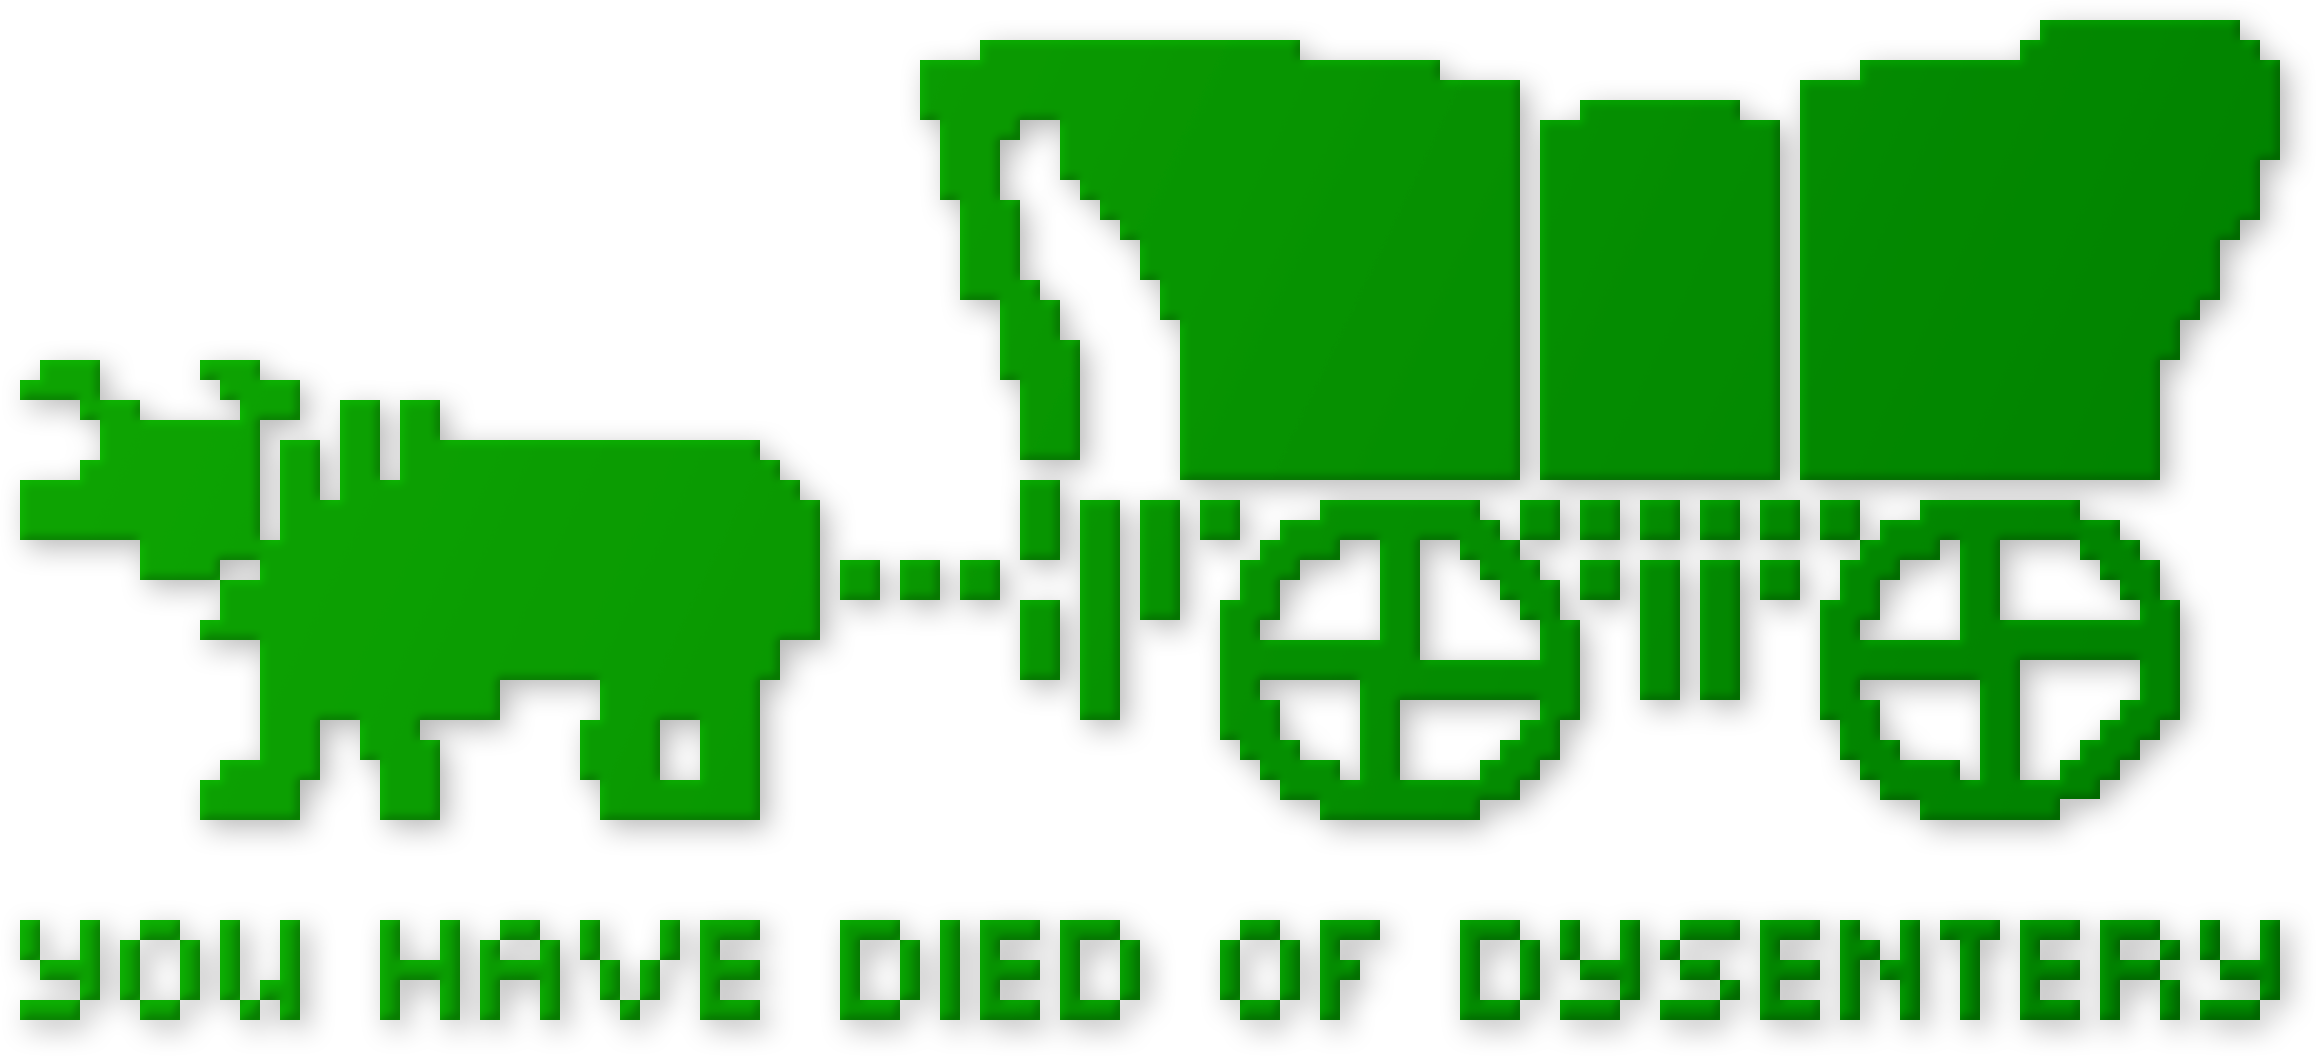 dysentery causes